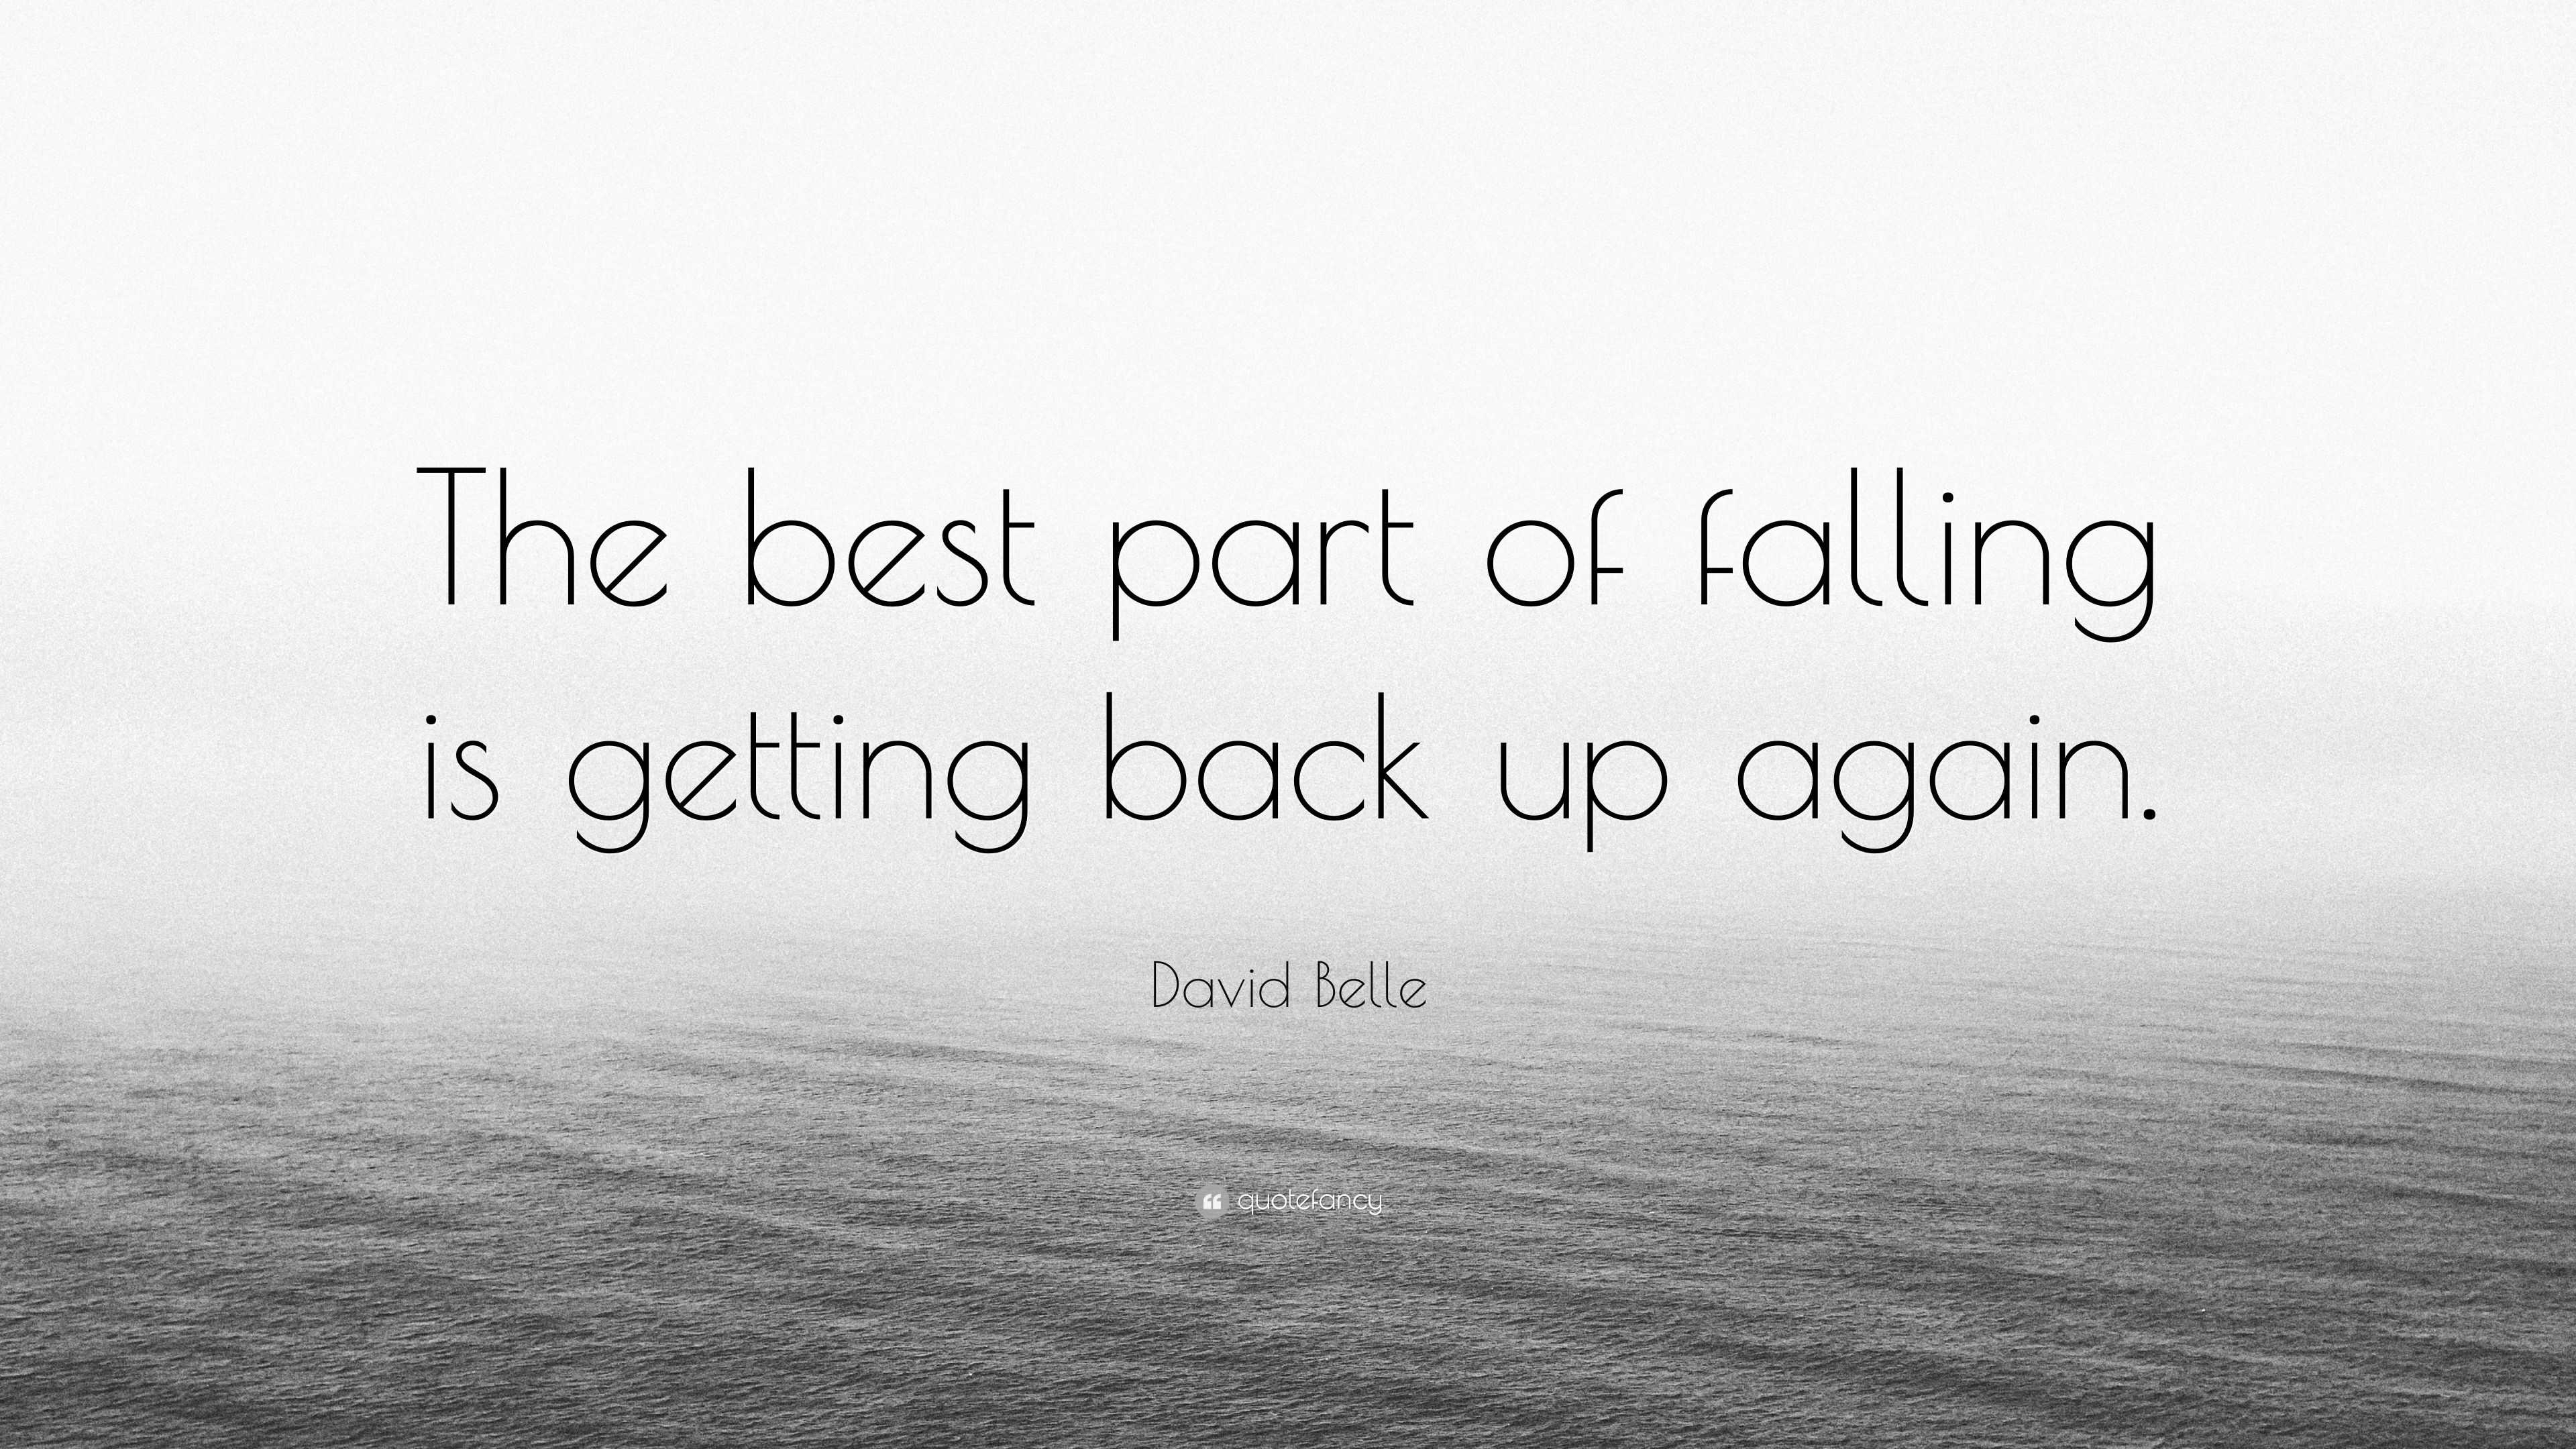 Falling down is part of life. Getting back